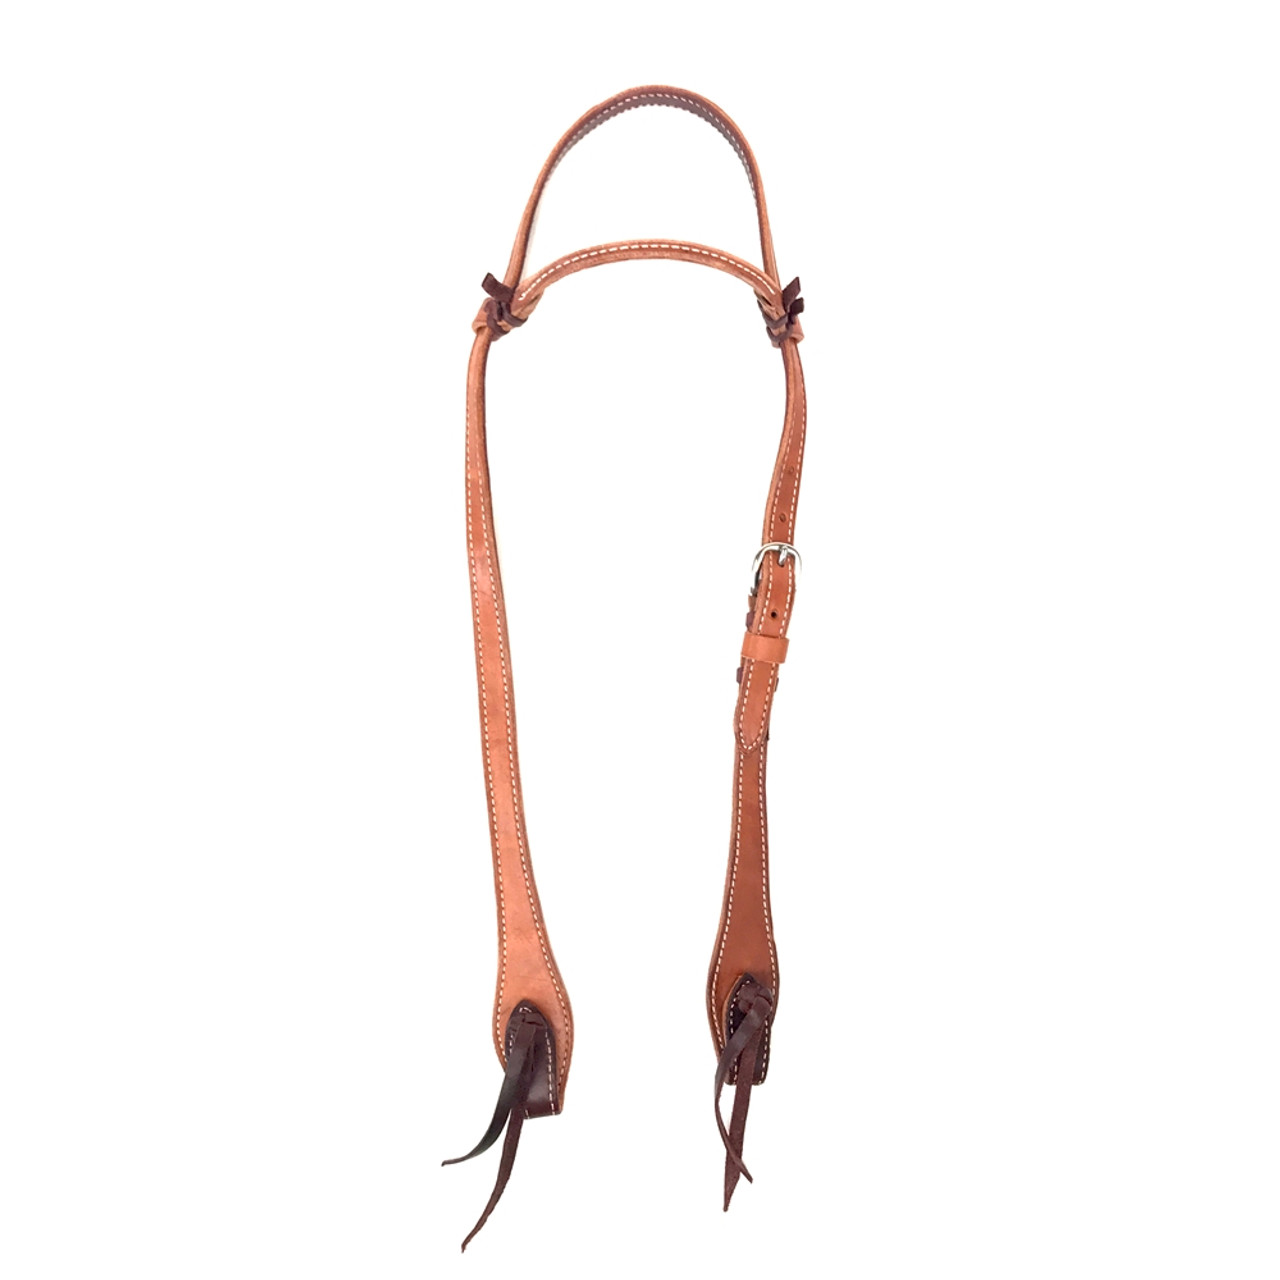 Elite Rolled Slip Ear Headstall, Hand Laced, Pineapple Knot (Two Tone)